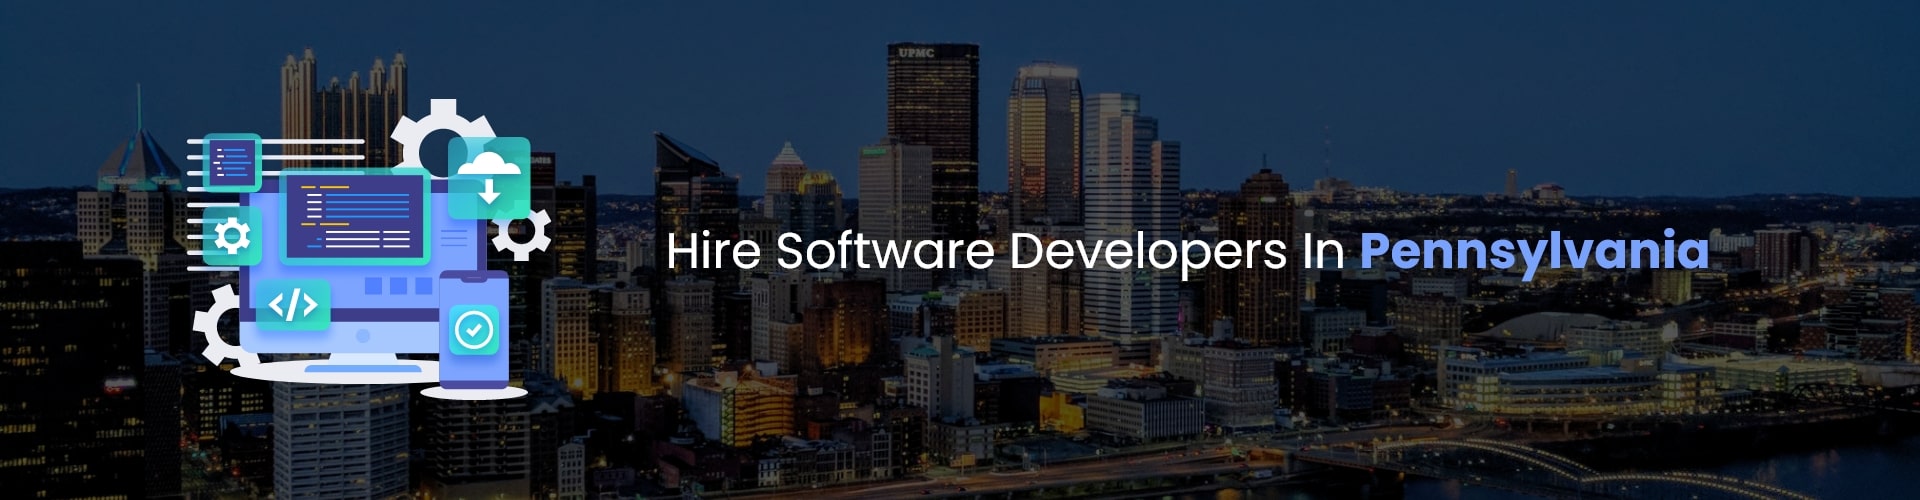 hire software developers in pennsylvania